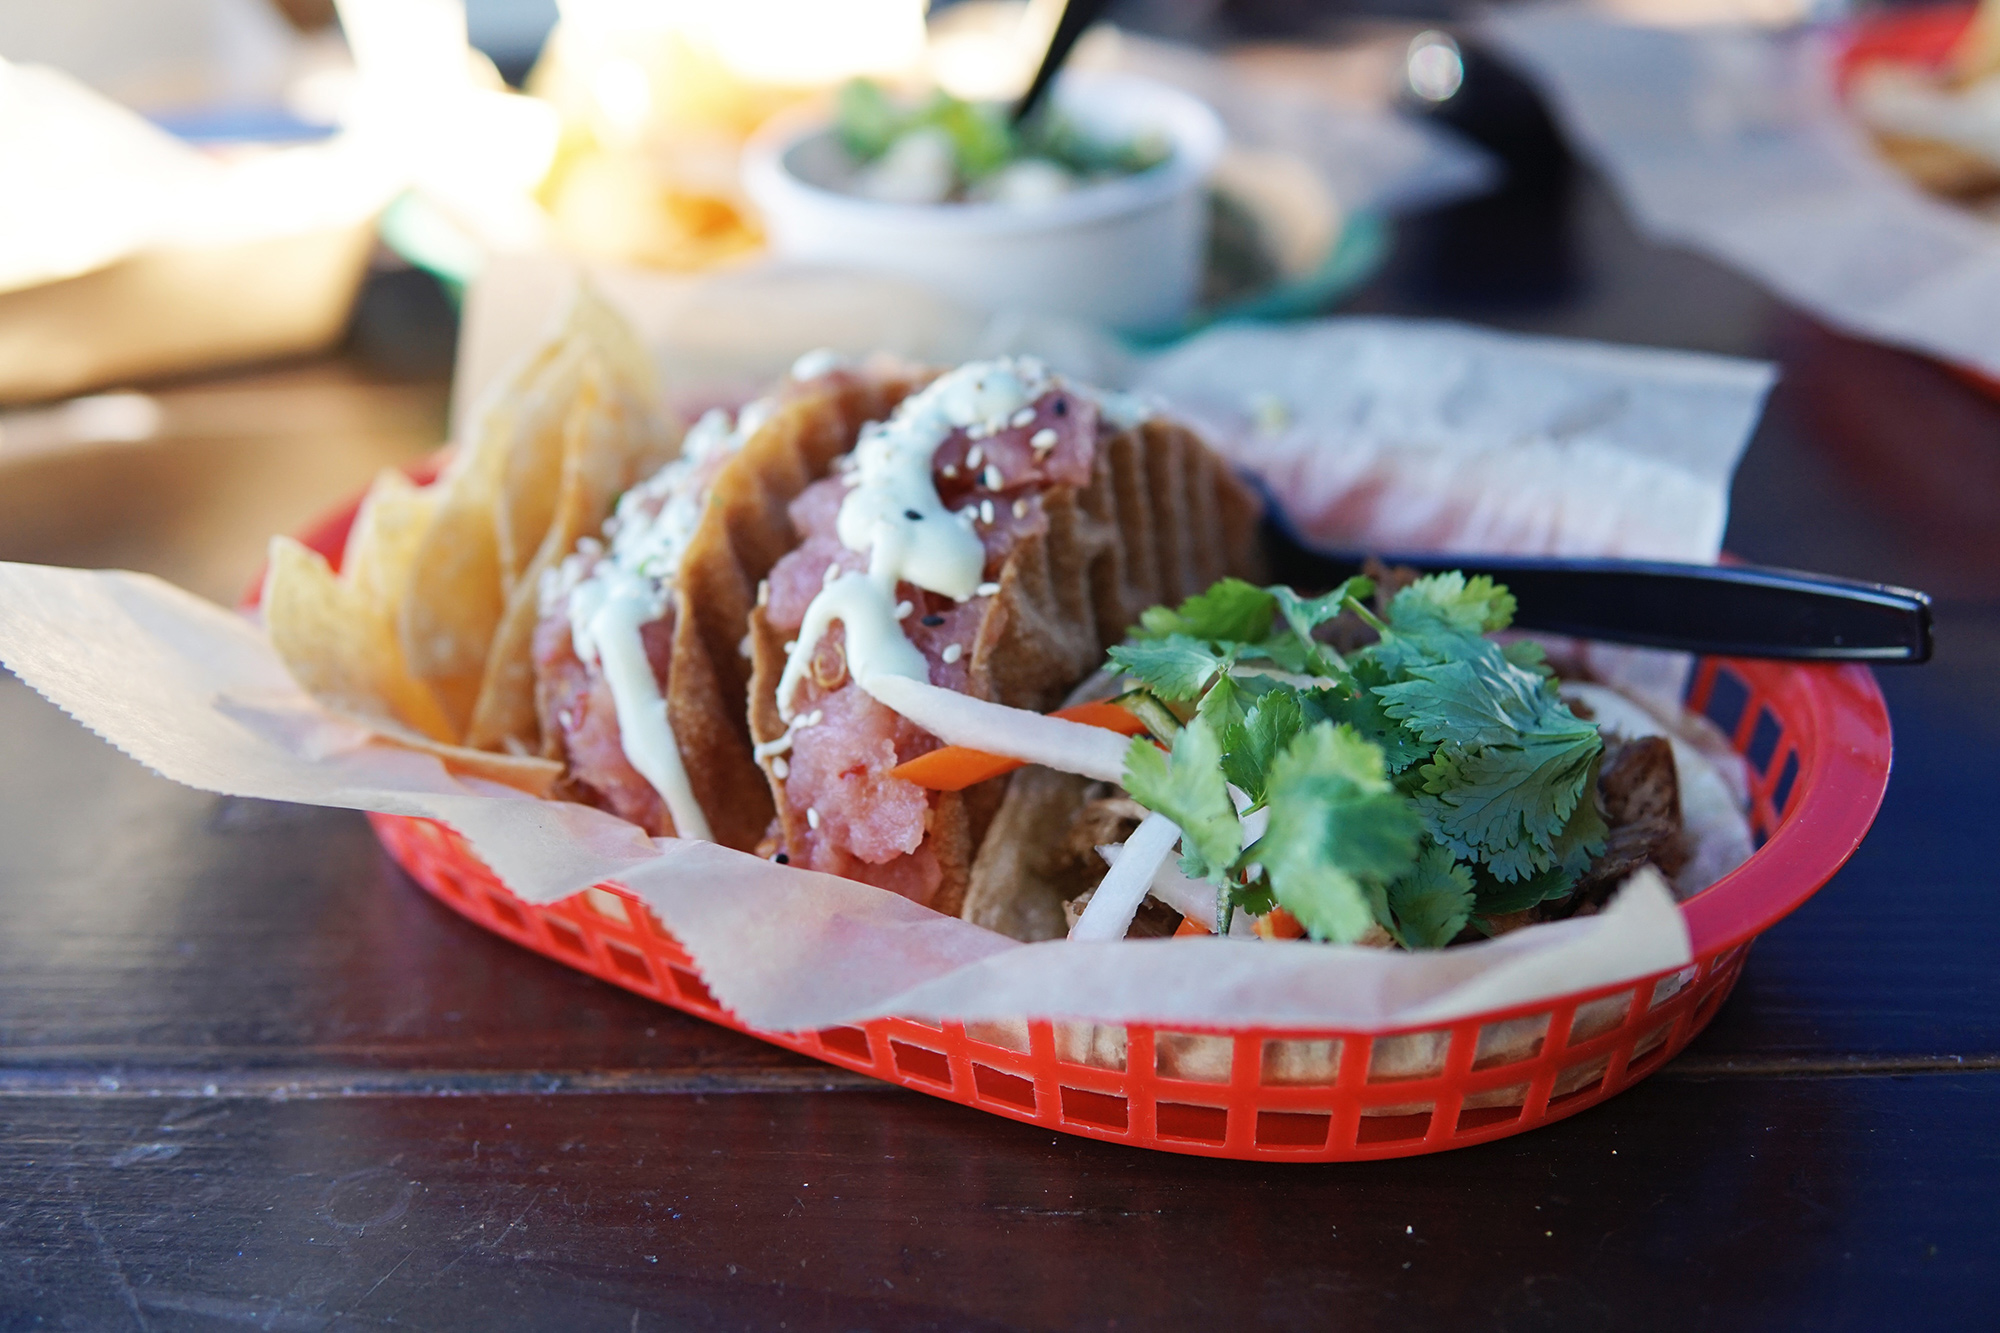 Get the poke taco at East Beach Tacos, you won't be sorry.